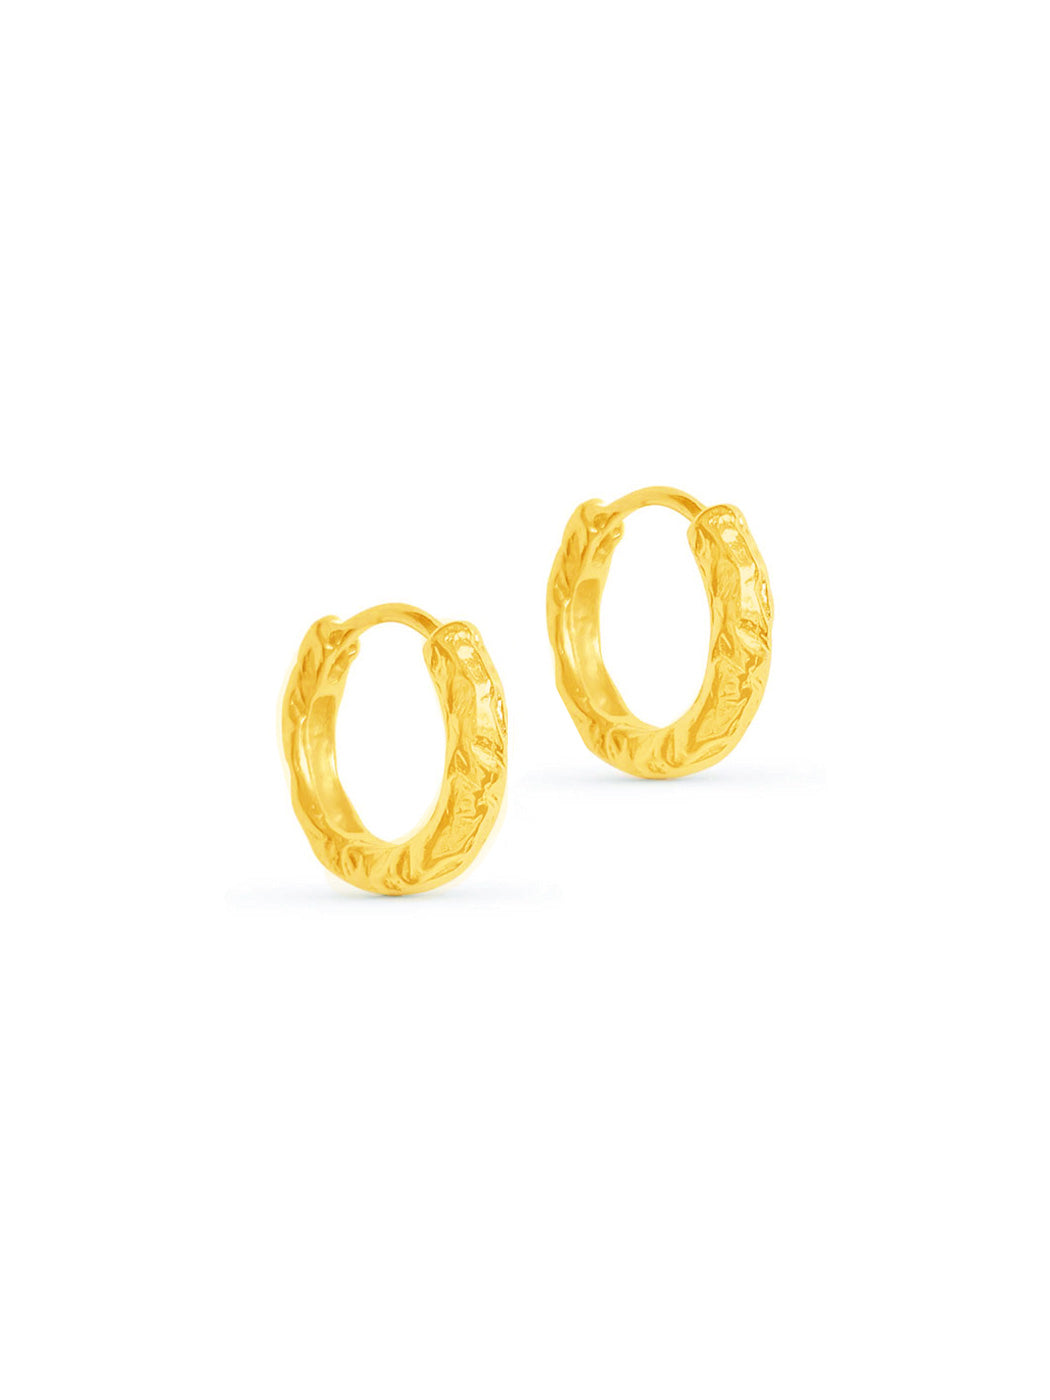 textured everyday gold hoops